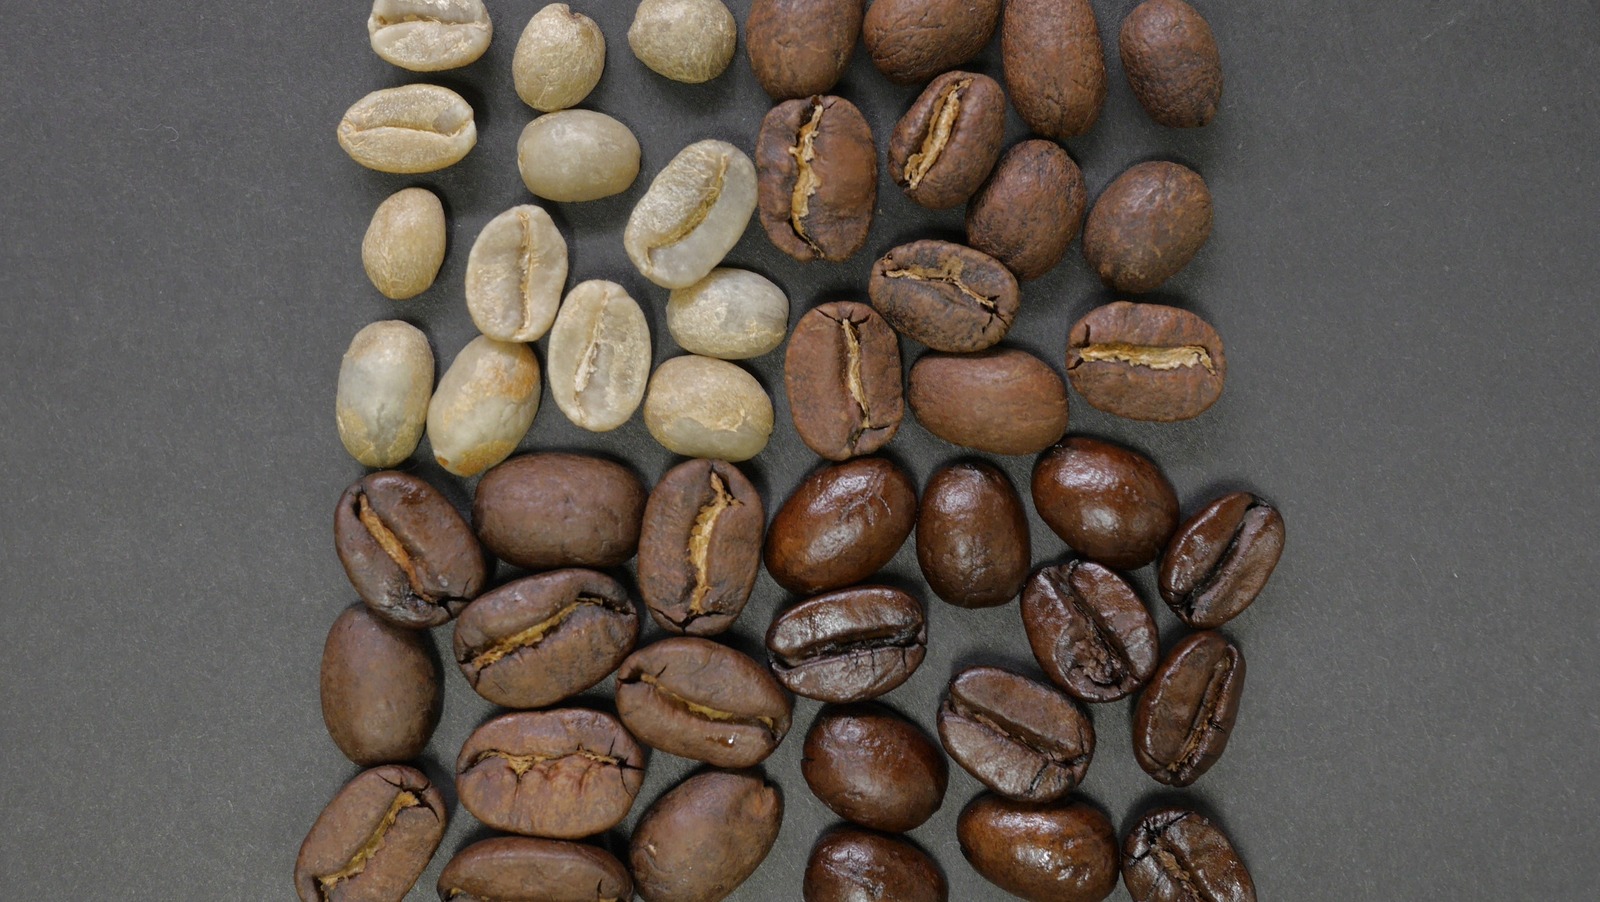 How to Store Coffee, According to a Professional Roaster